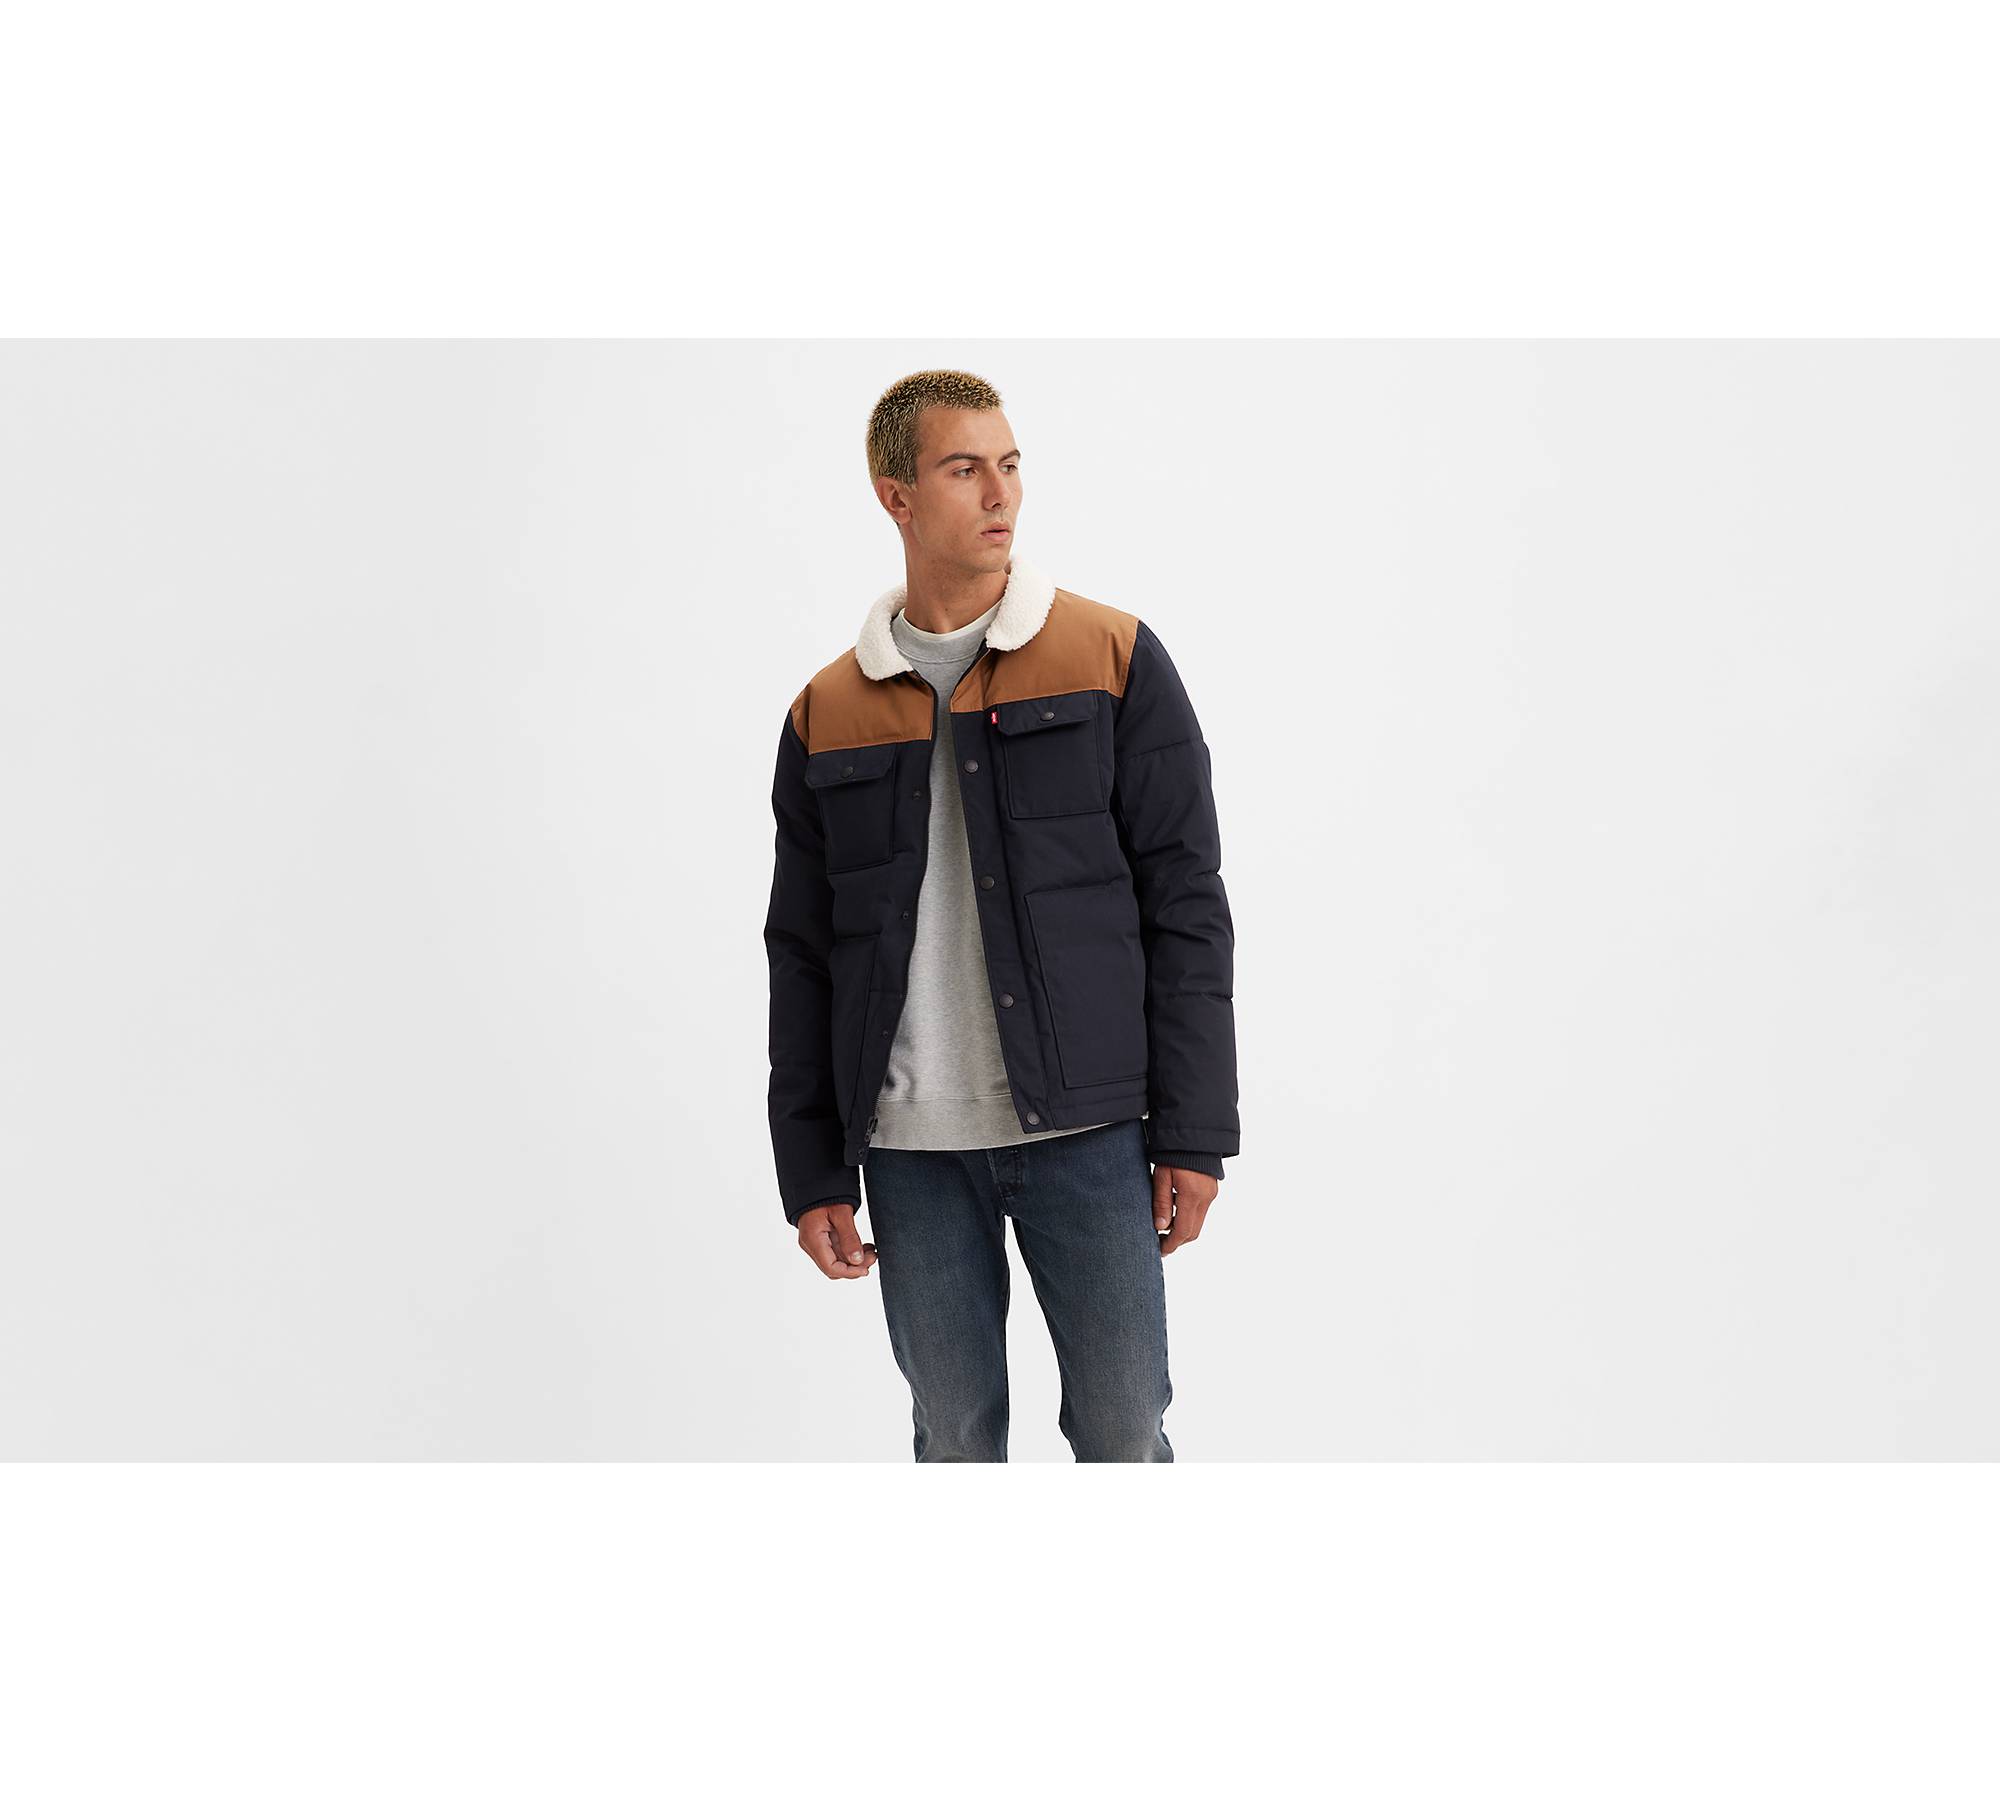 Quilted Woodsman Puffer Jacket - Multi-color